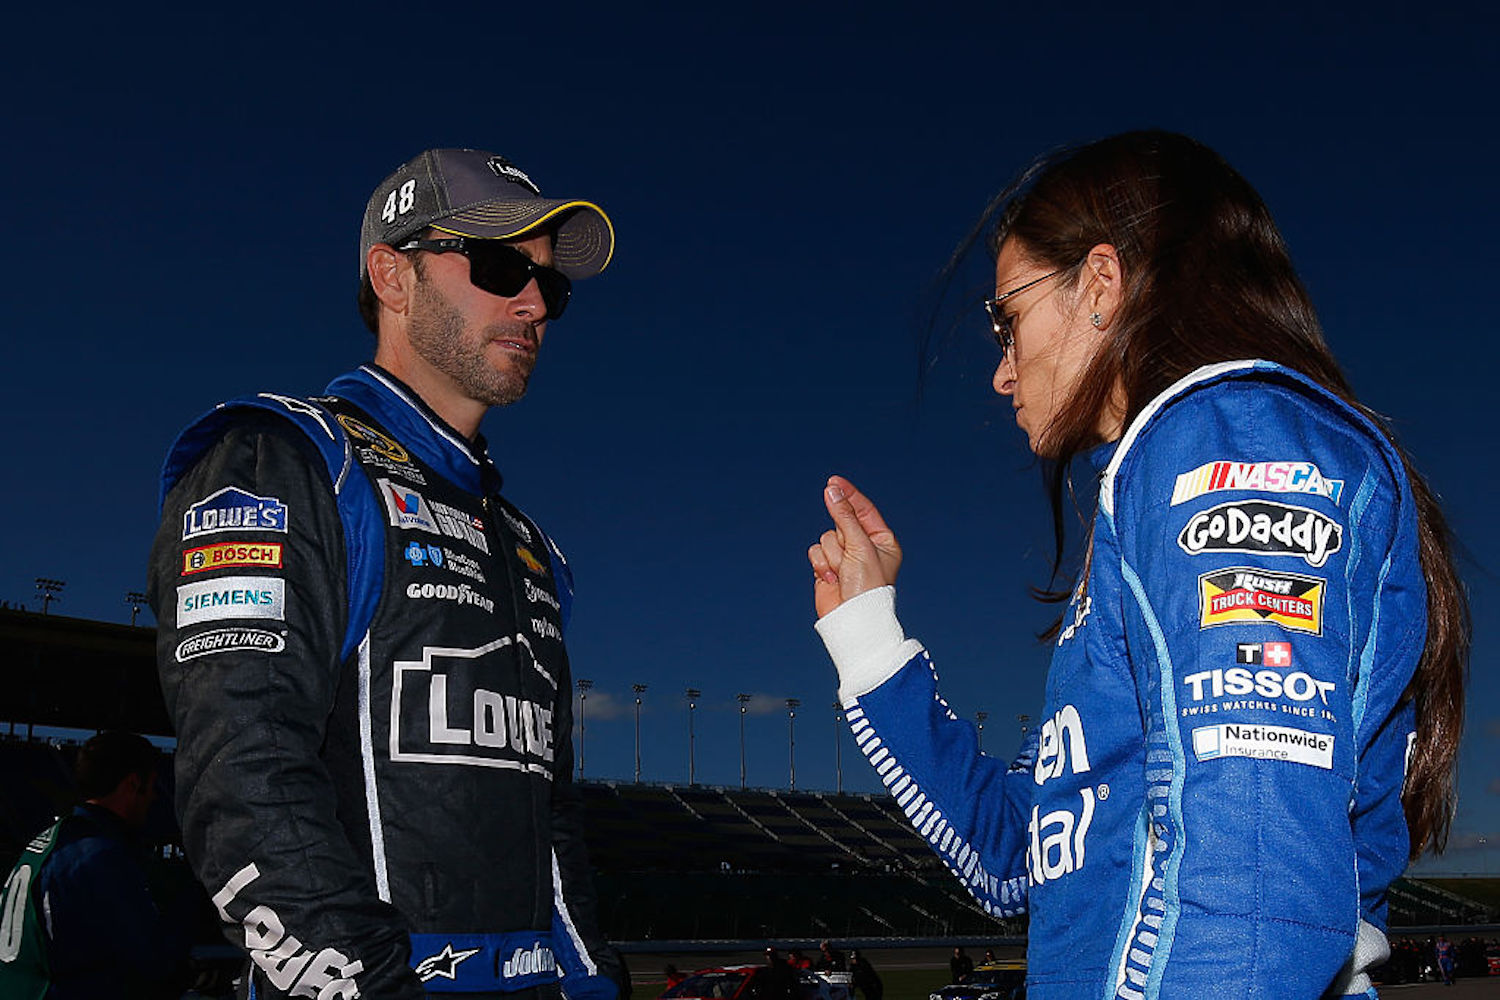 NASCAR legend Jimmie Johnson has announced his retirement from racing, but not before offering some wise advice to Danica Patrick.